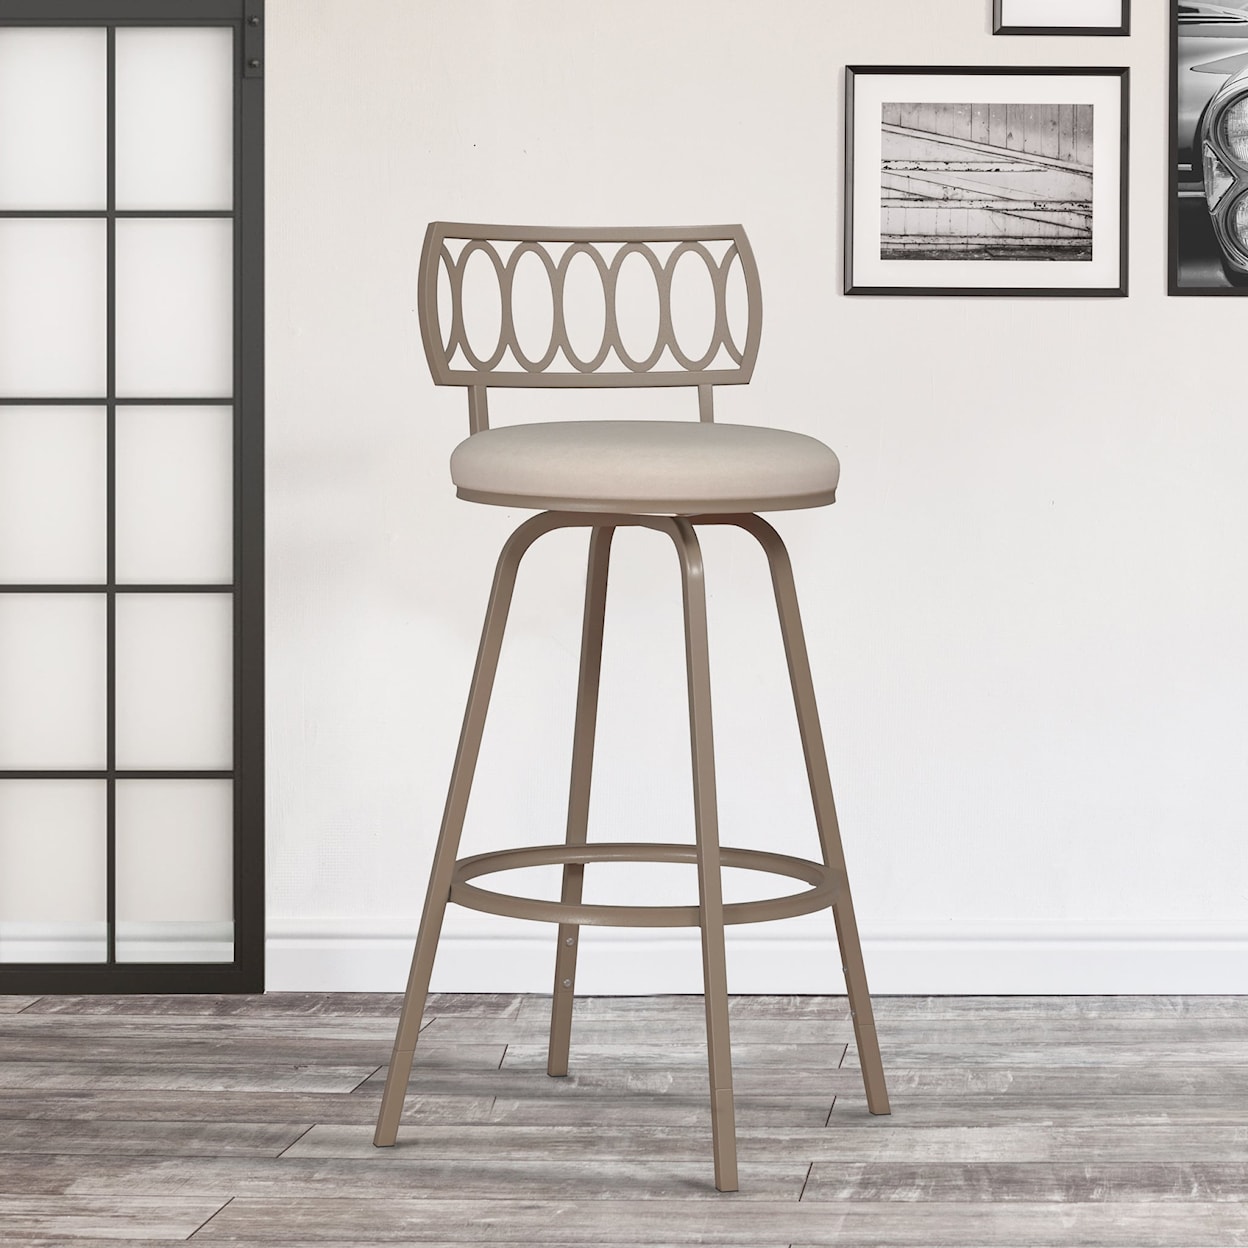 Hillsdale Canal Street Counter and Bar Stools